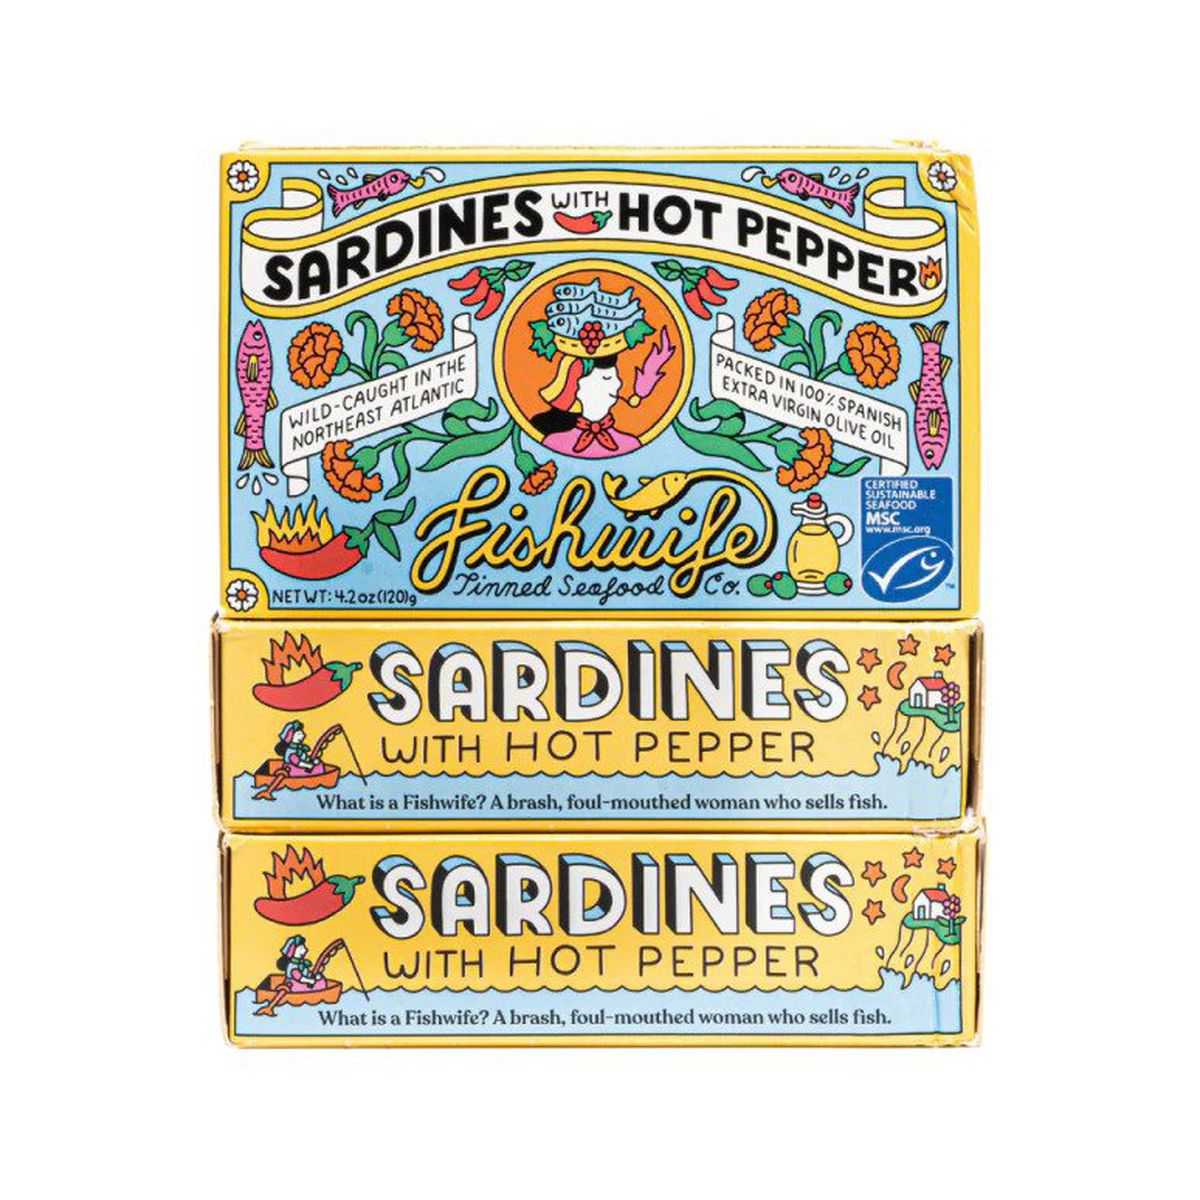 Two boxes of Fishwife sardines with hot pepper